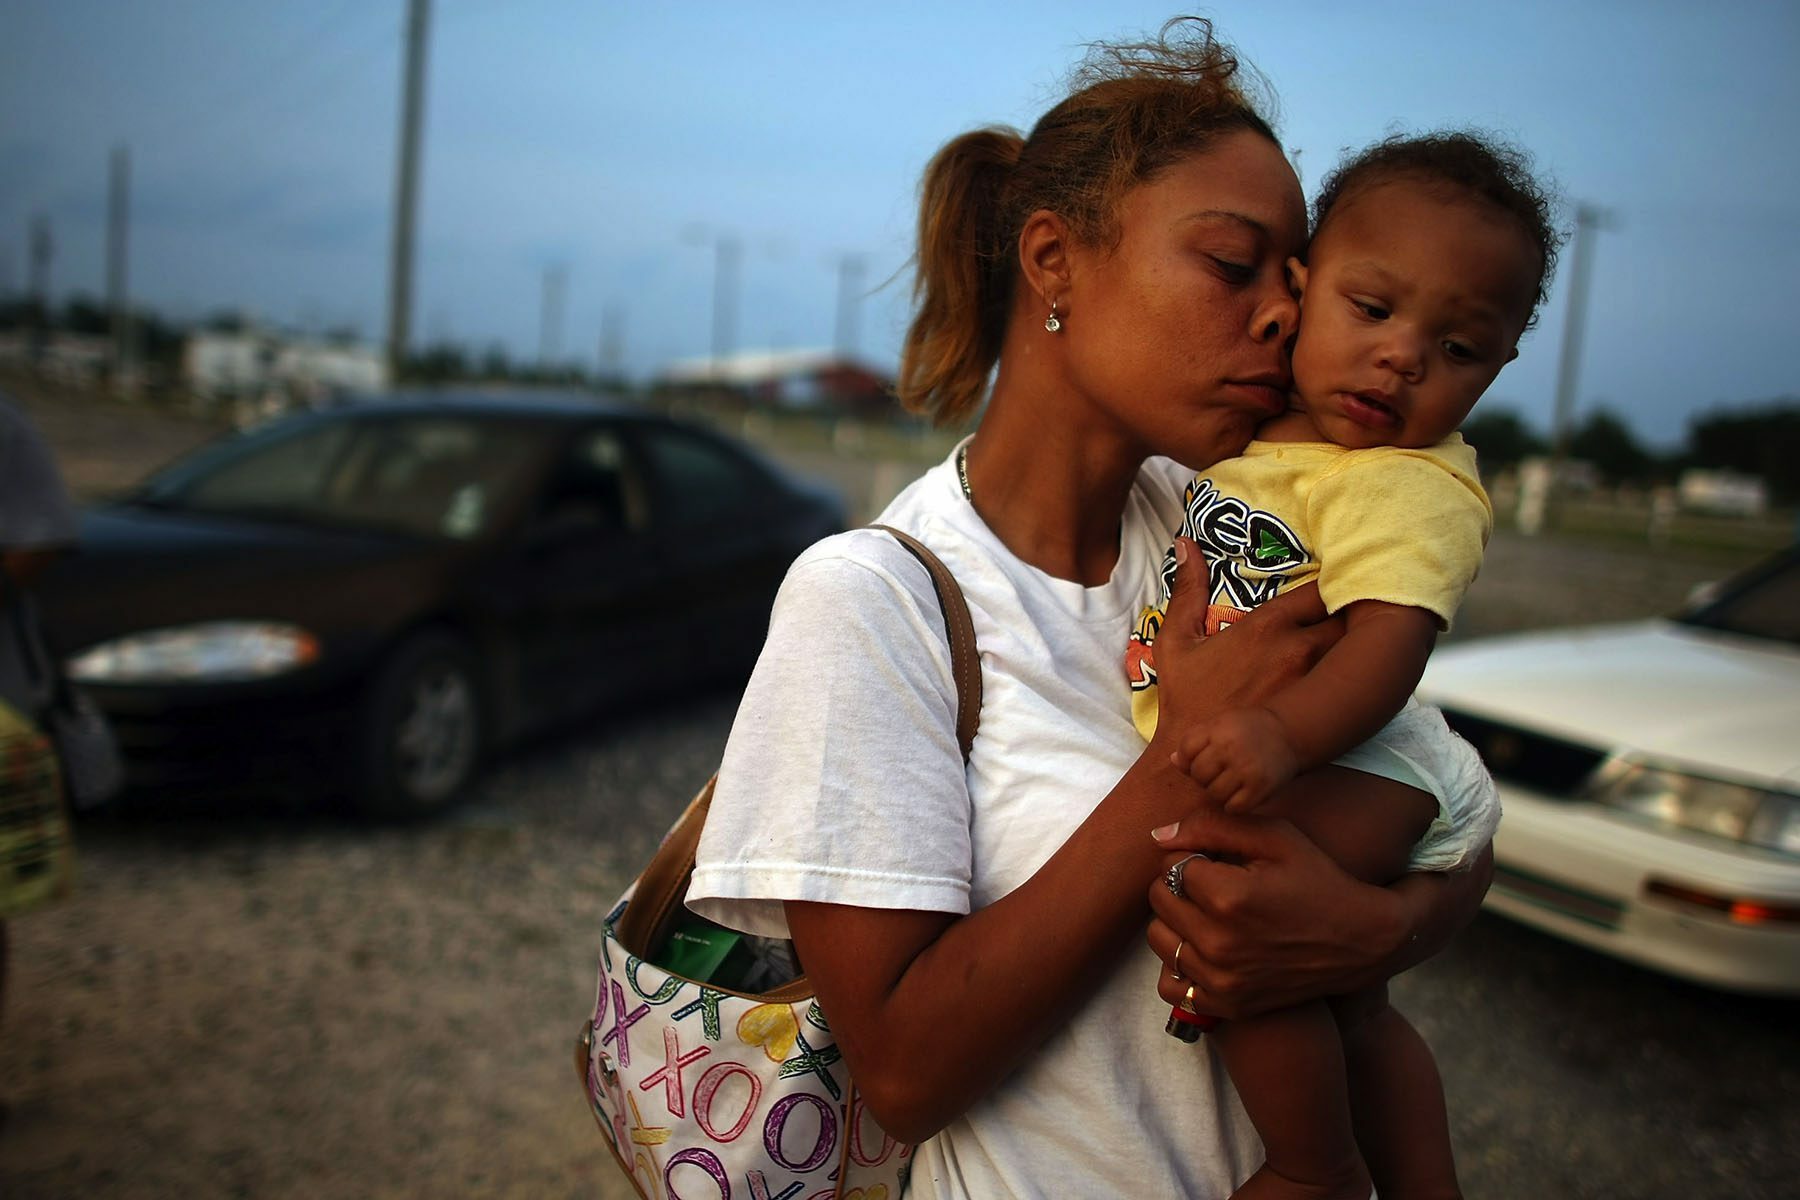 A young woman presses her face against a young child's face while standing on rubble road where cars are parked.